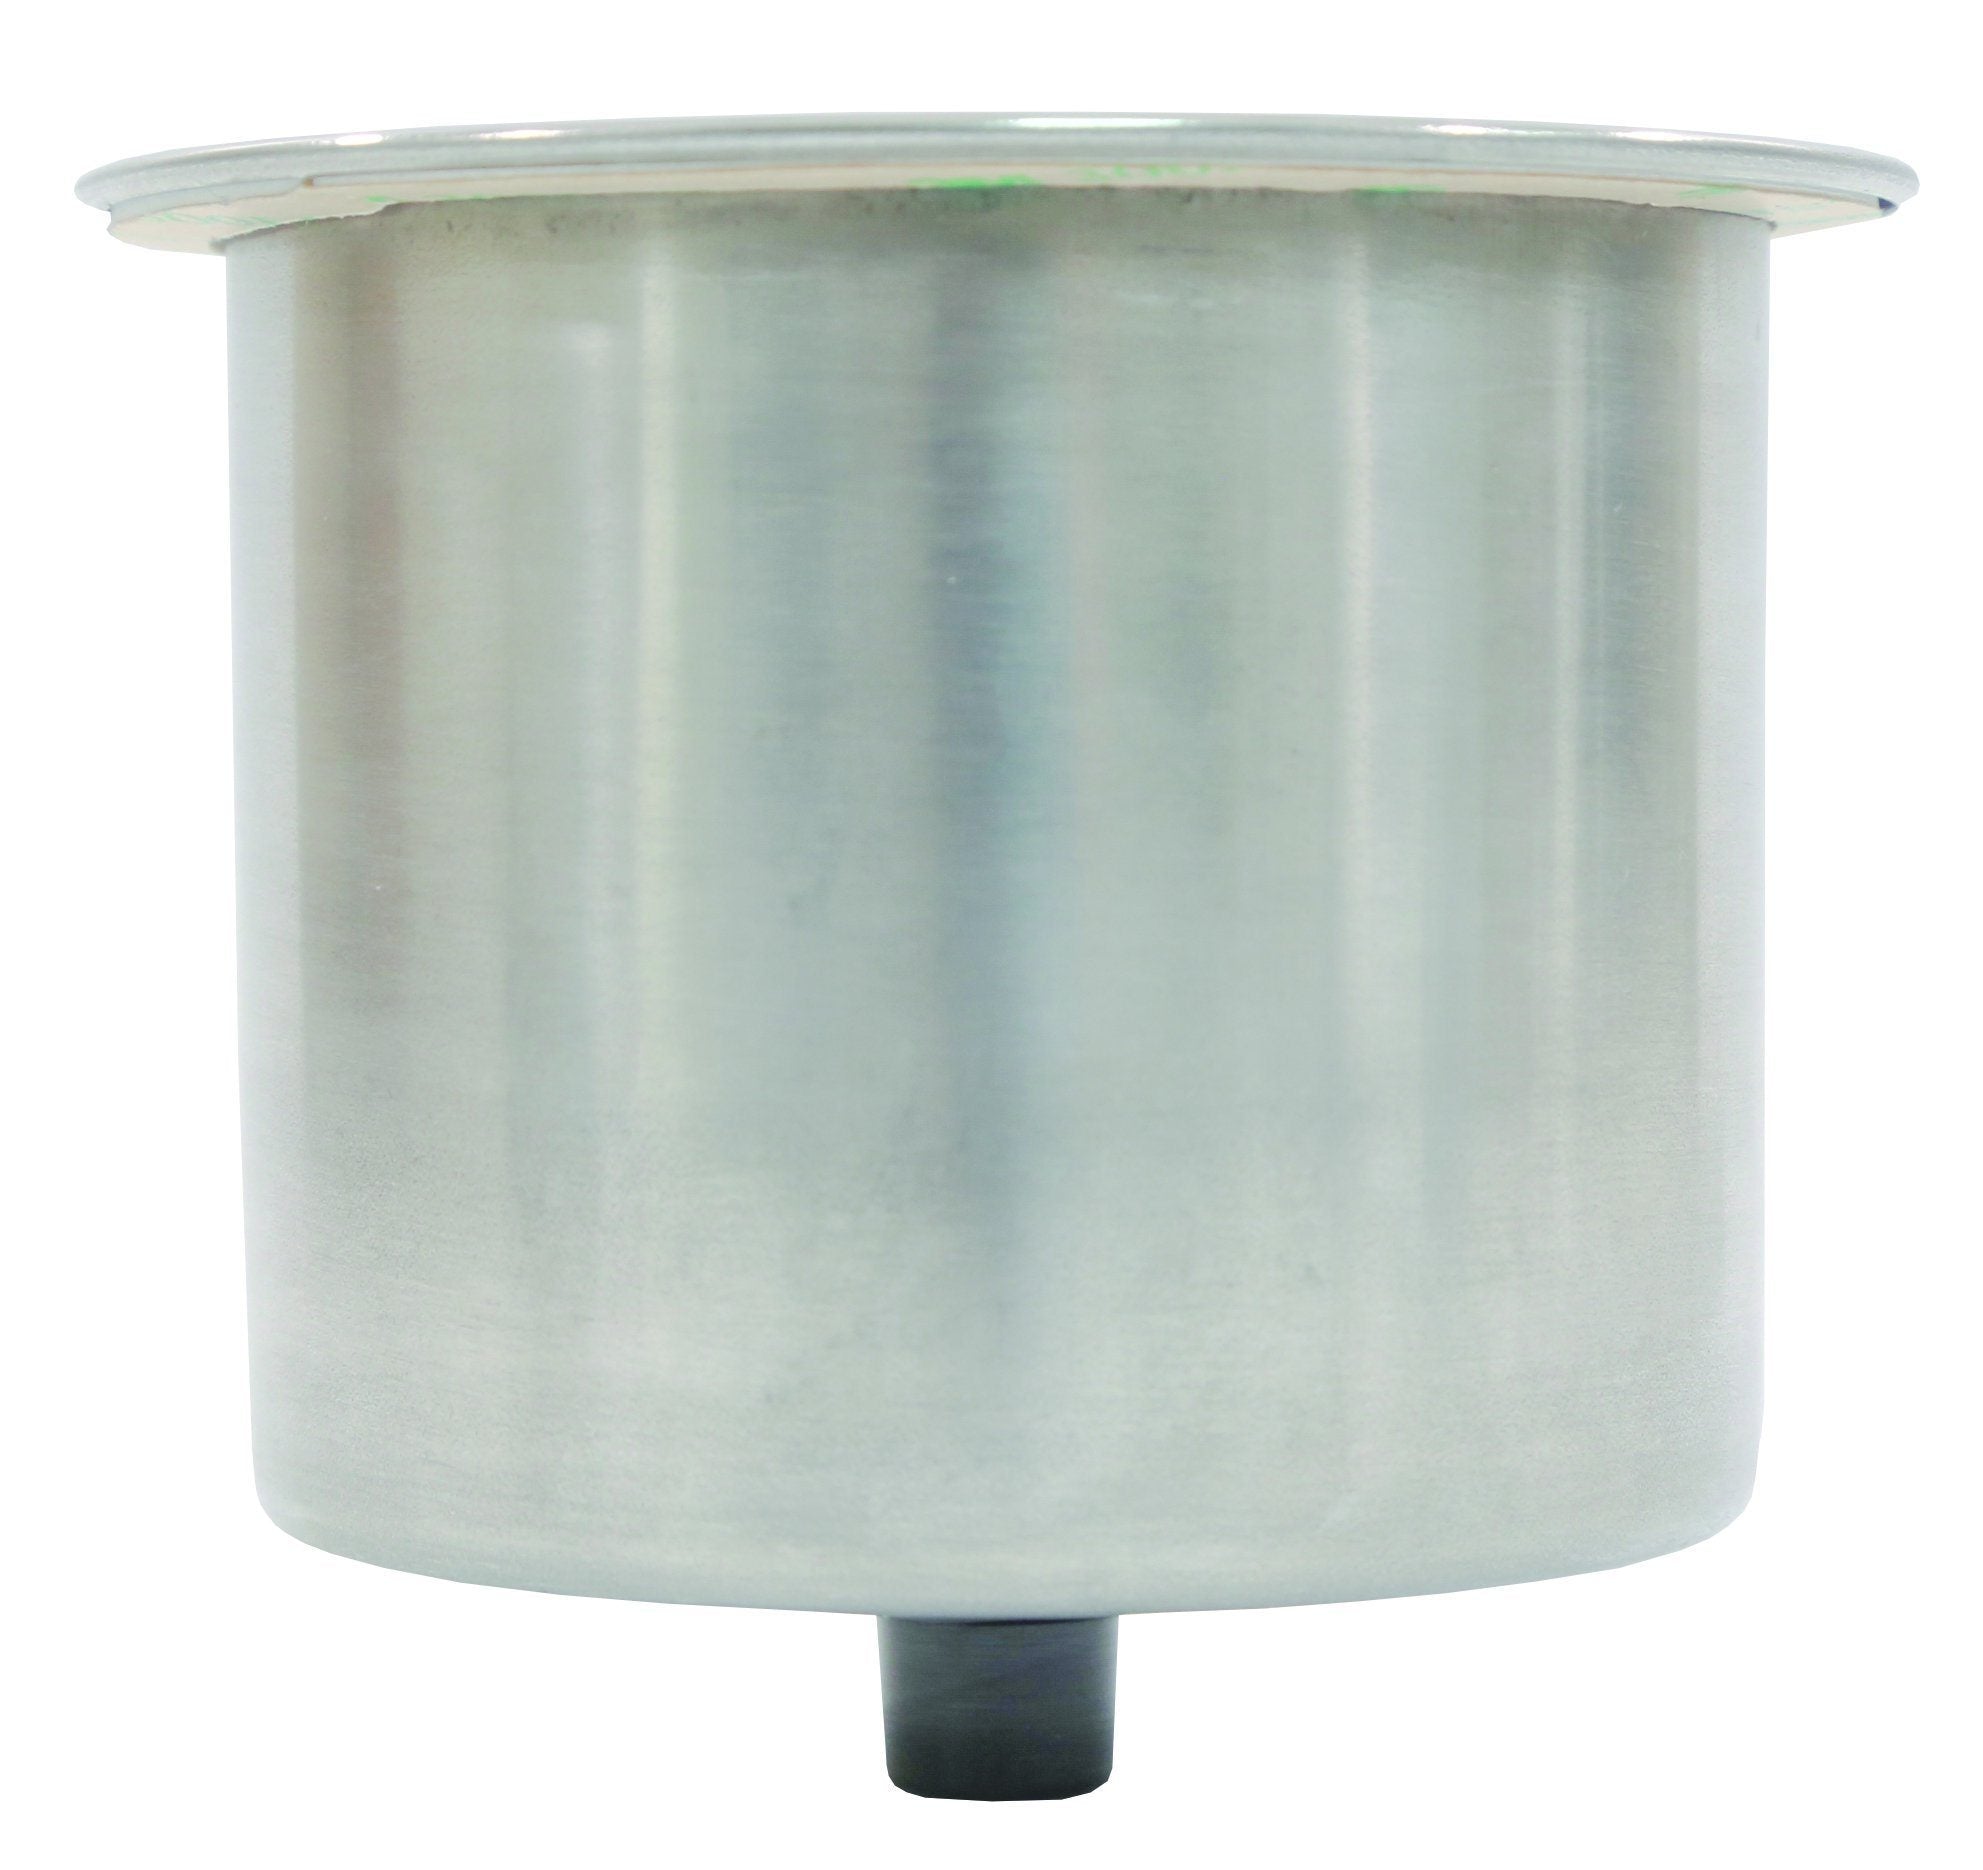 Stainless Steel No Step Cup Holder - T-H Marine Supplies